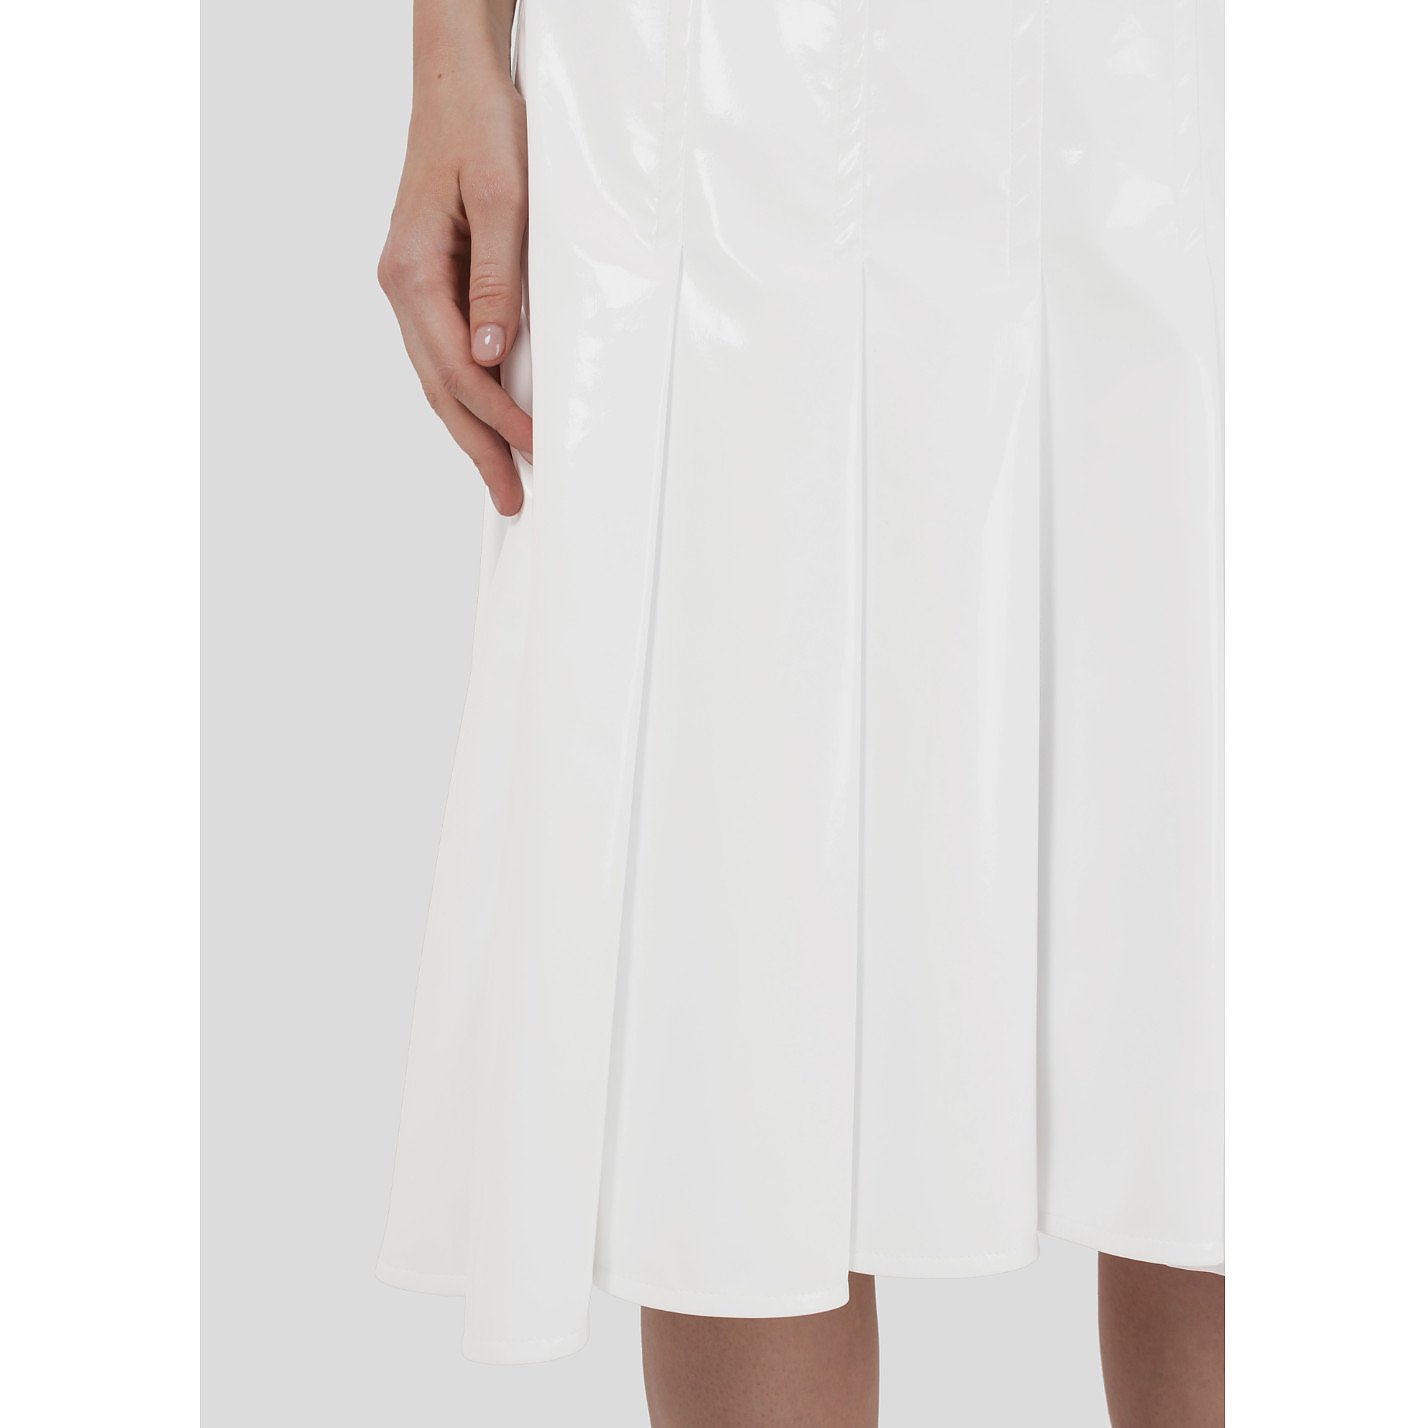 Eudon Choi Patent Pleated Skirt